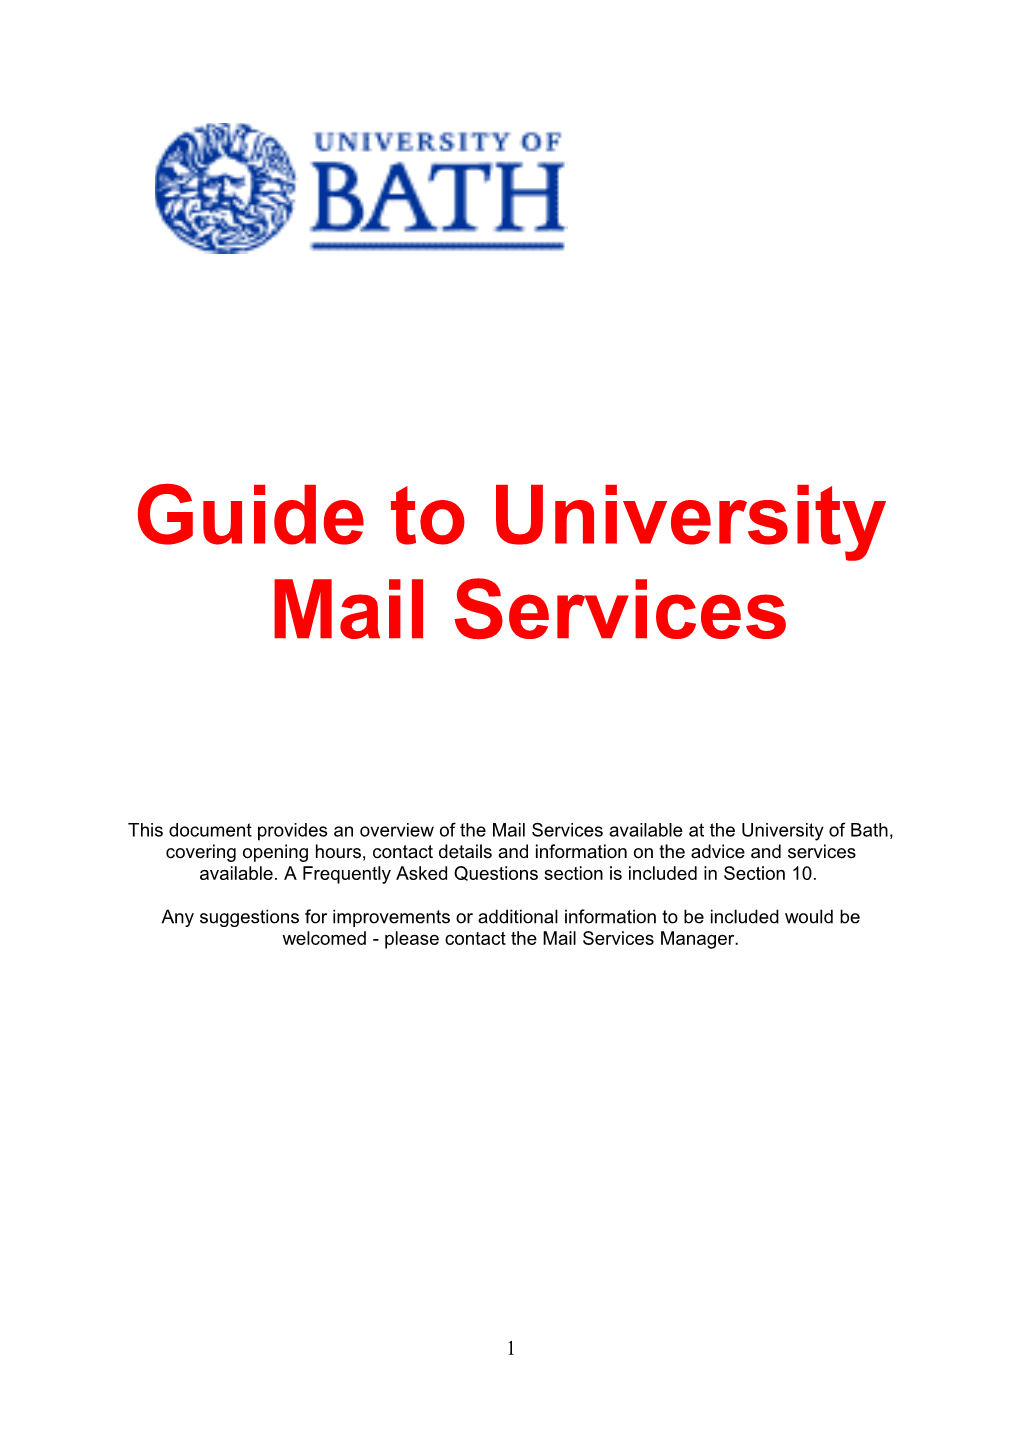 Postal and Related Services